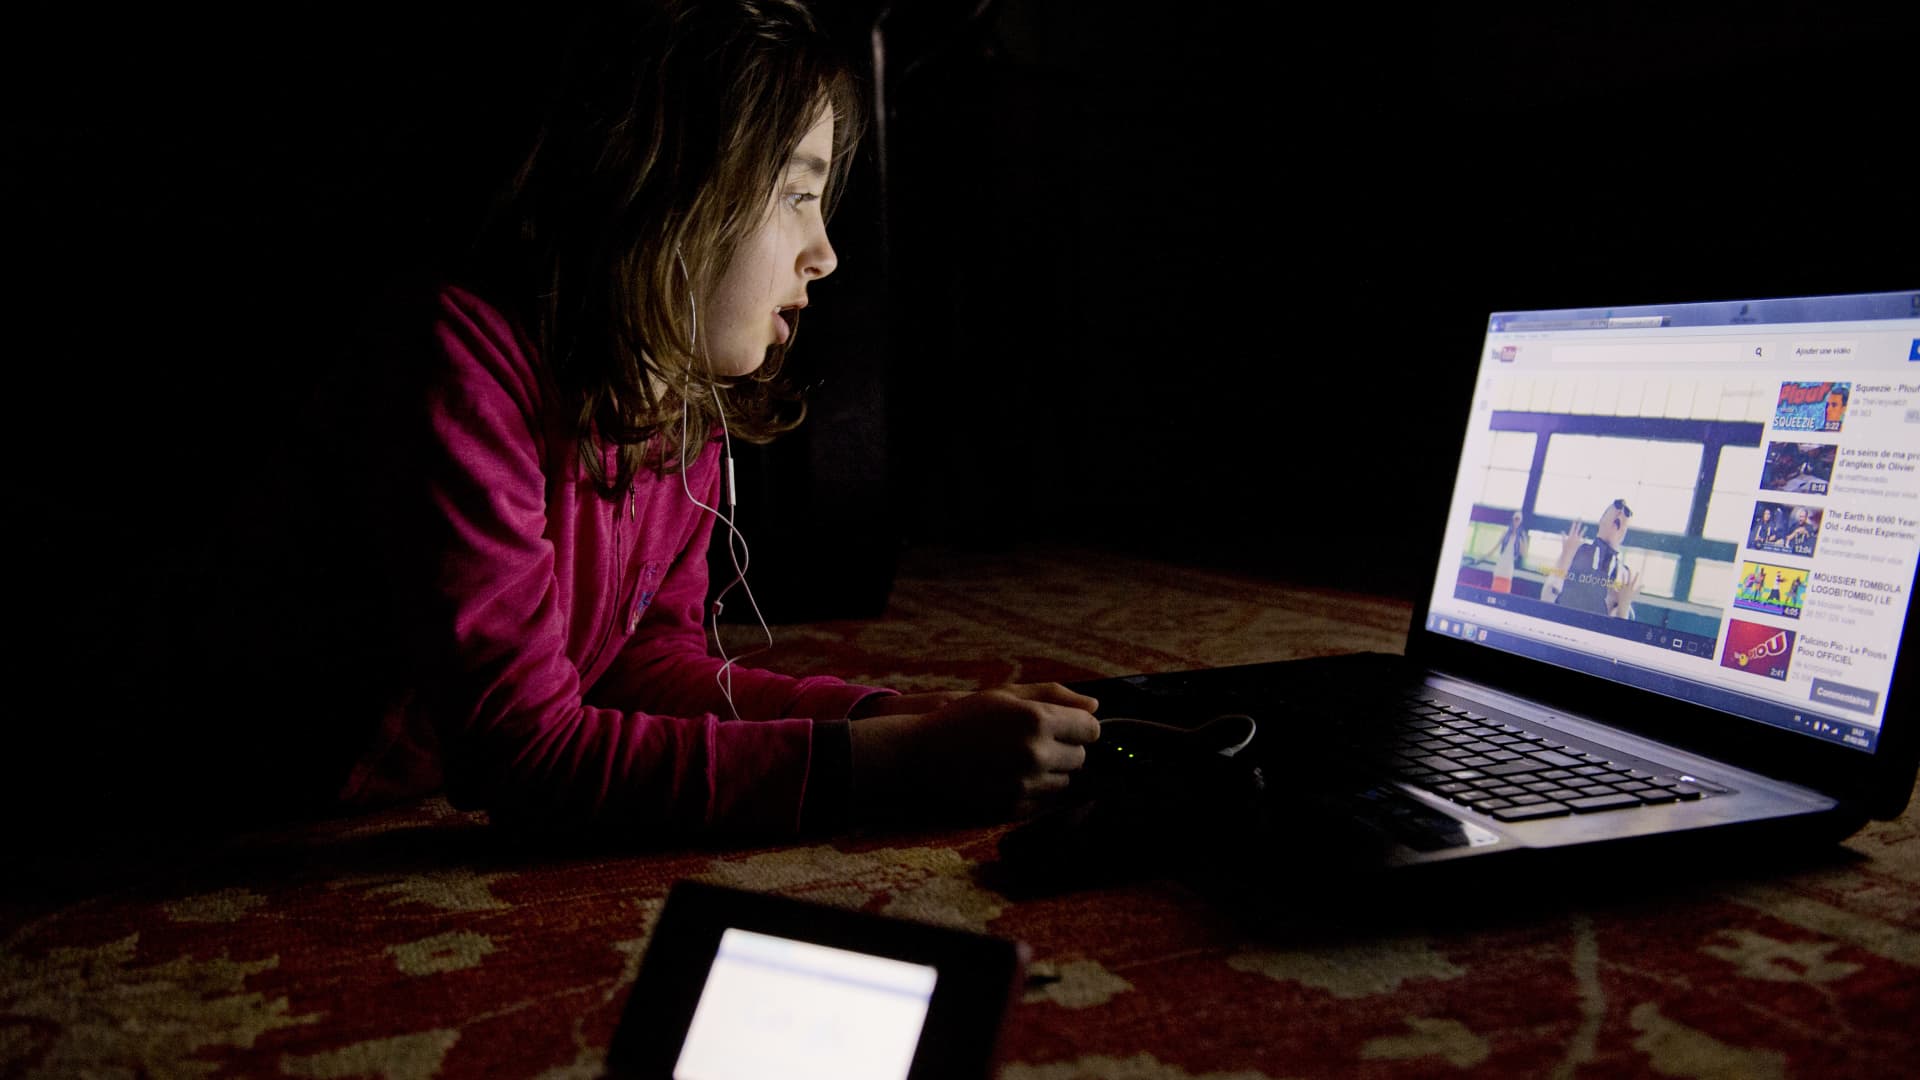 California passes bill aimed at making the internet safer for kids